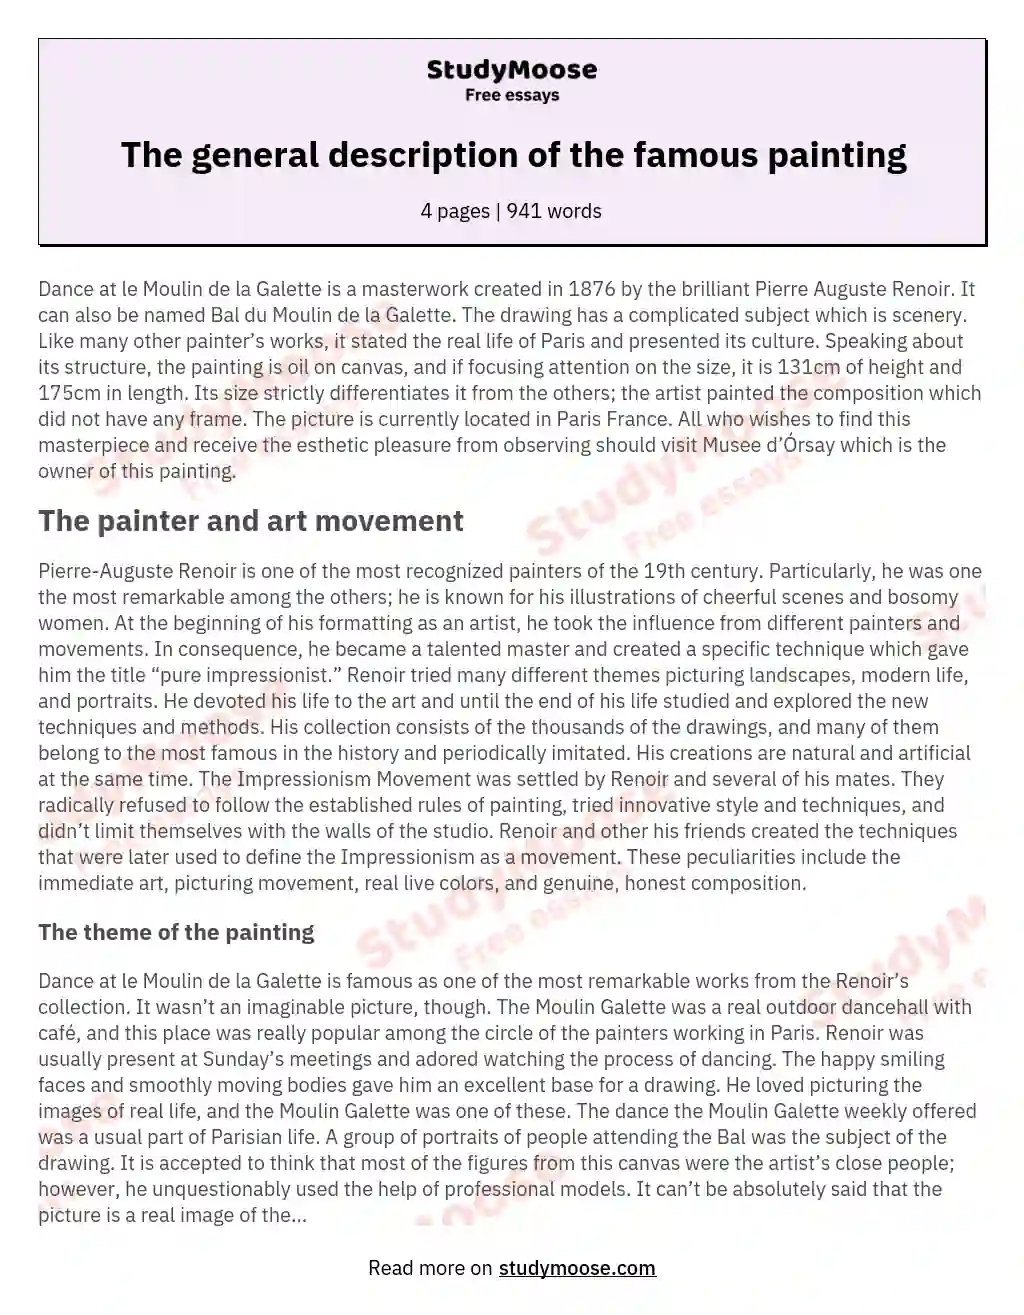 The general description of the famous painting essay